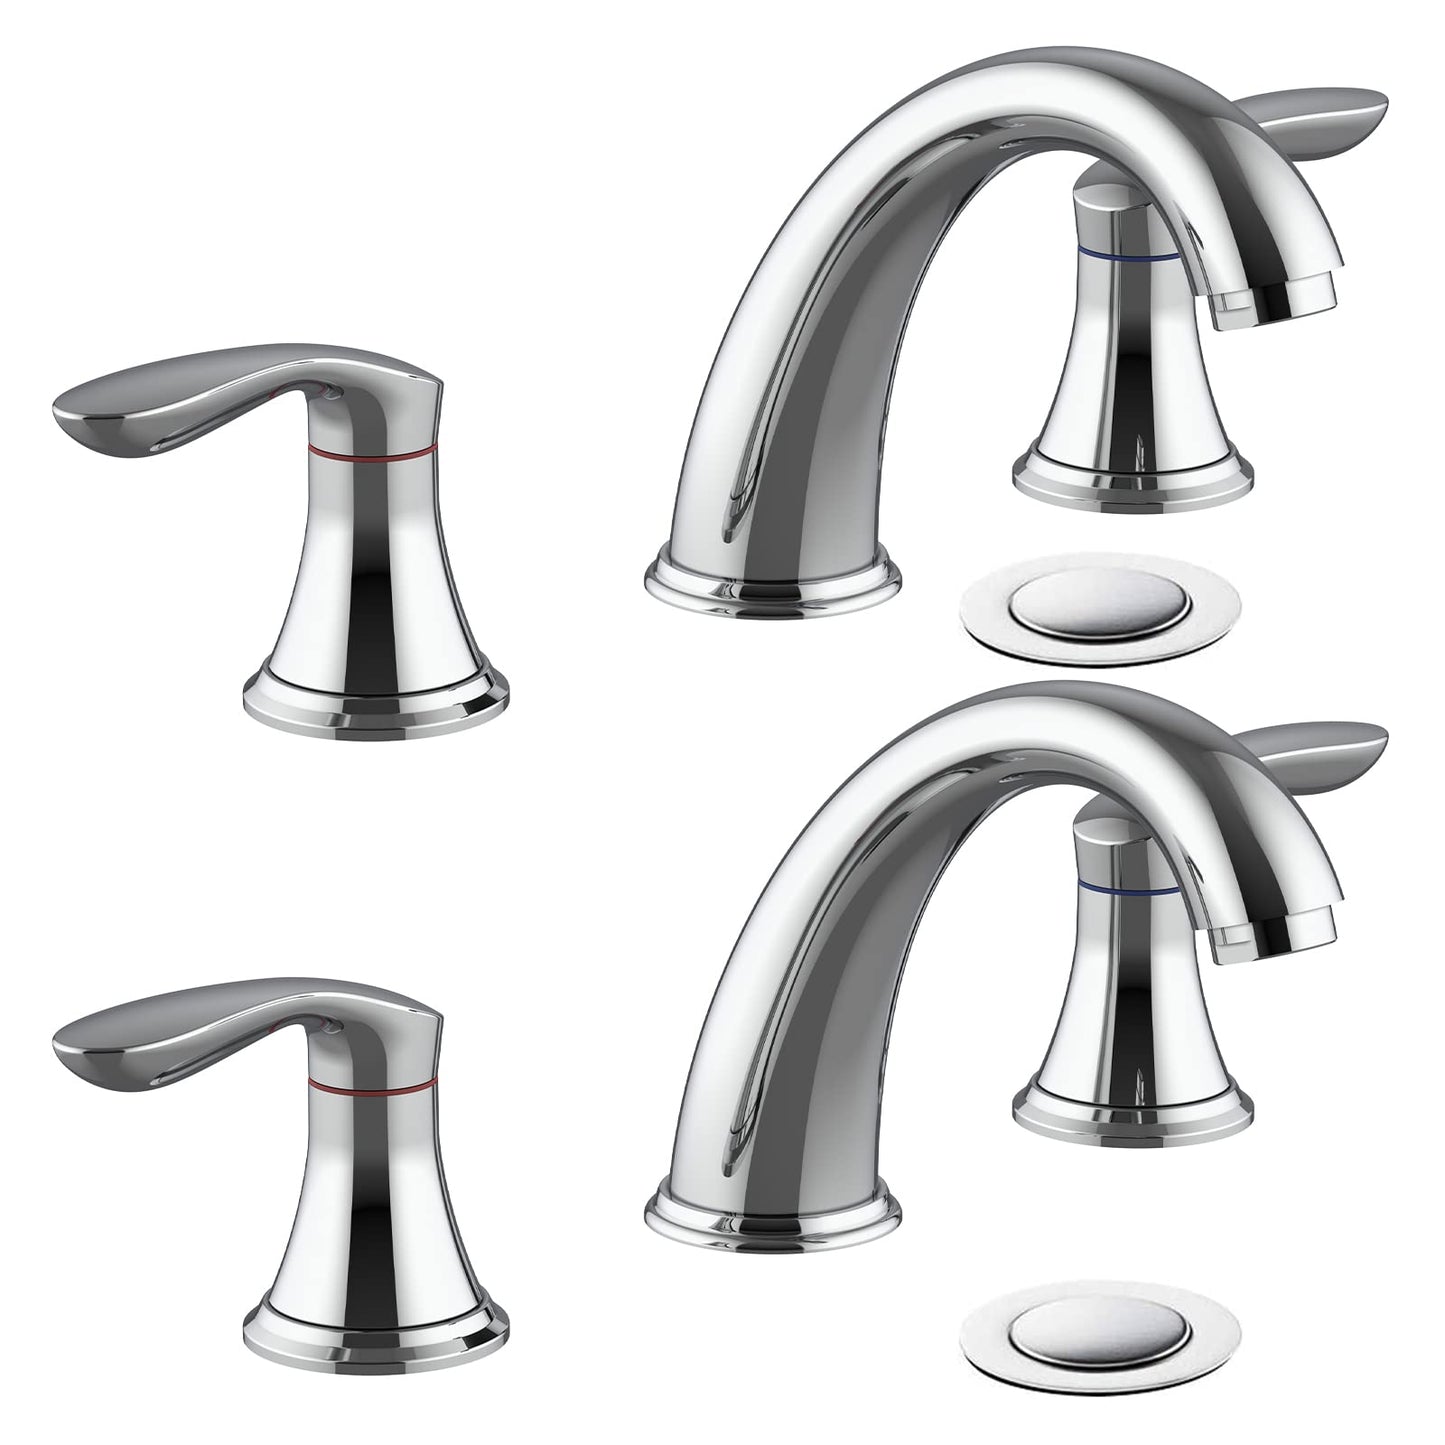 Bathroom Sink Faucet, Faucet for Bathroom Sink, Widespread Brushed Nickel Bathroom Faucet 3 Hole with Stainless Steel Pop Up Drain and cUPC Lead-Free Hose - (Brushed Nickel)